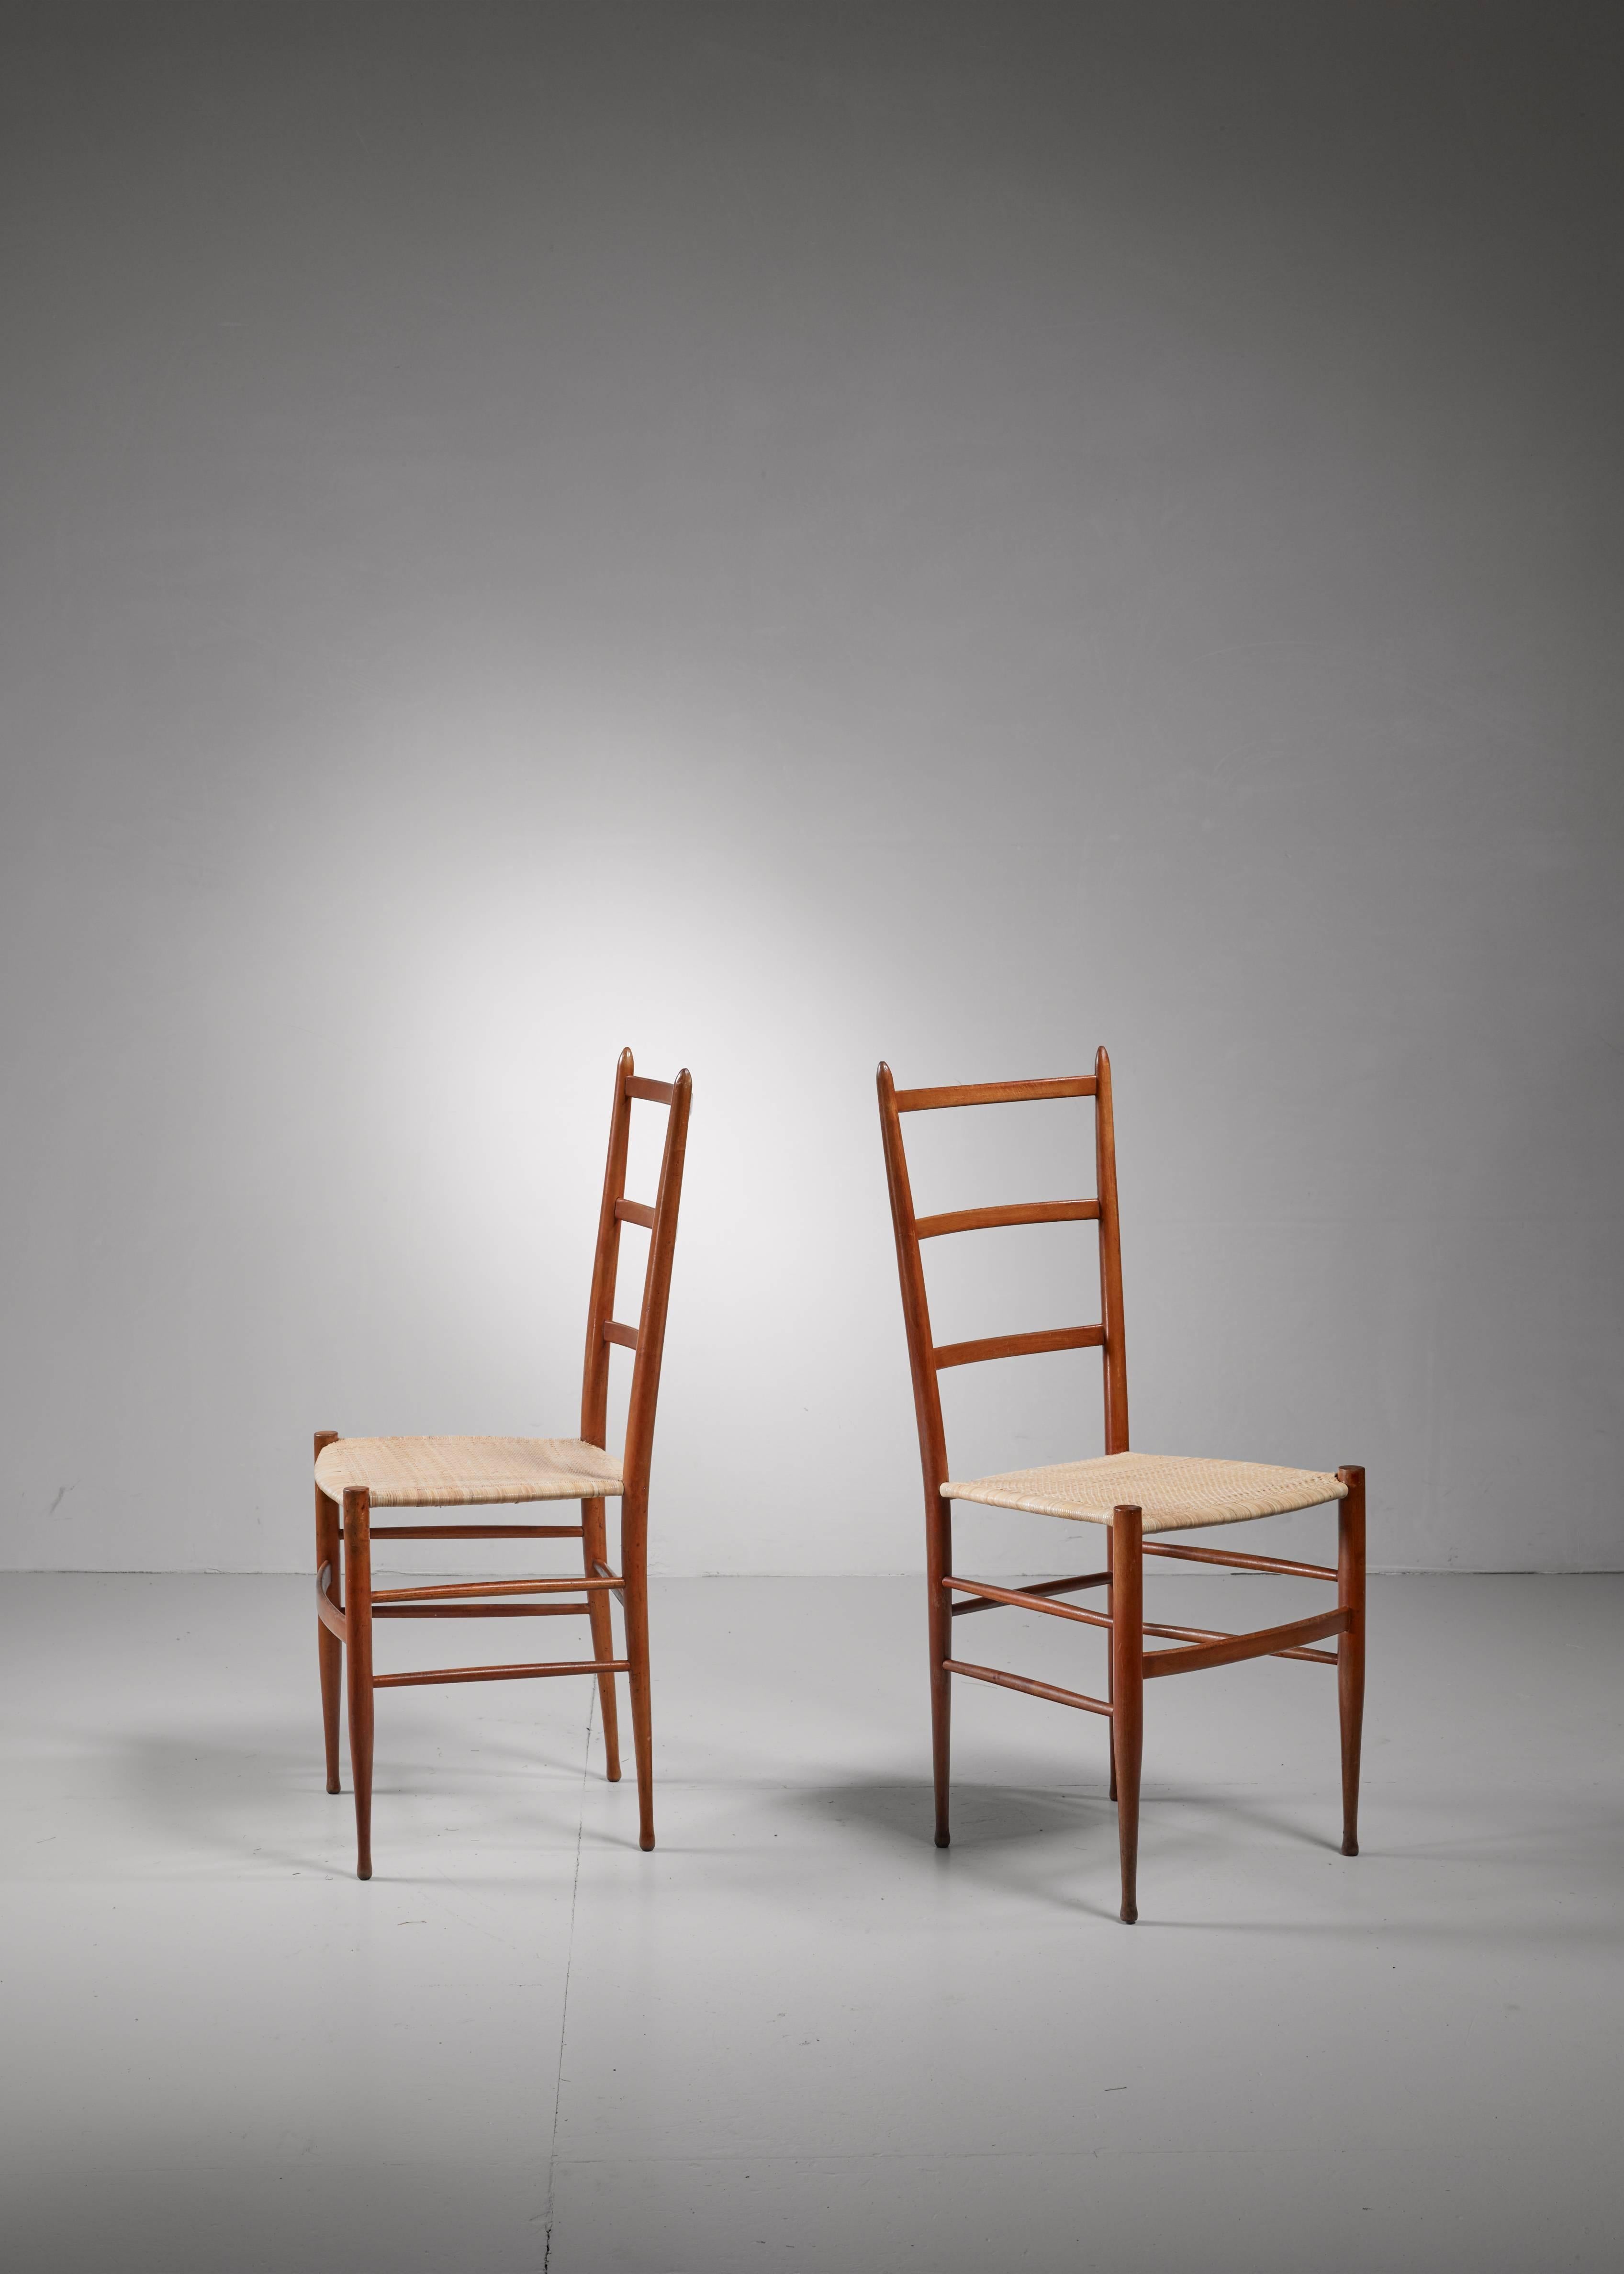 A pair of wooden Chiavari chairs with a woven cane seating.The chairs have been professionally reupholstered.

The slim and light chairs from Chiavari date back to 1807 and were the inspiration for Gio Ponti's 'superleggera' chair.